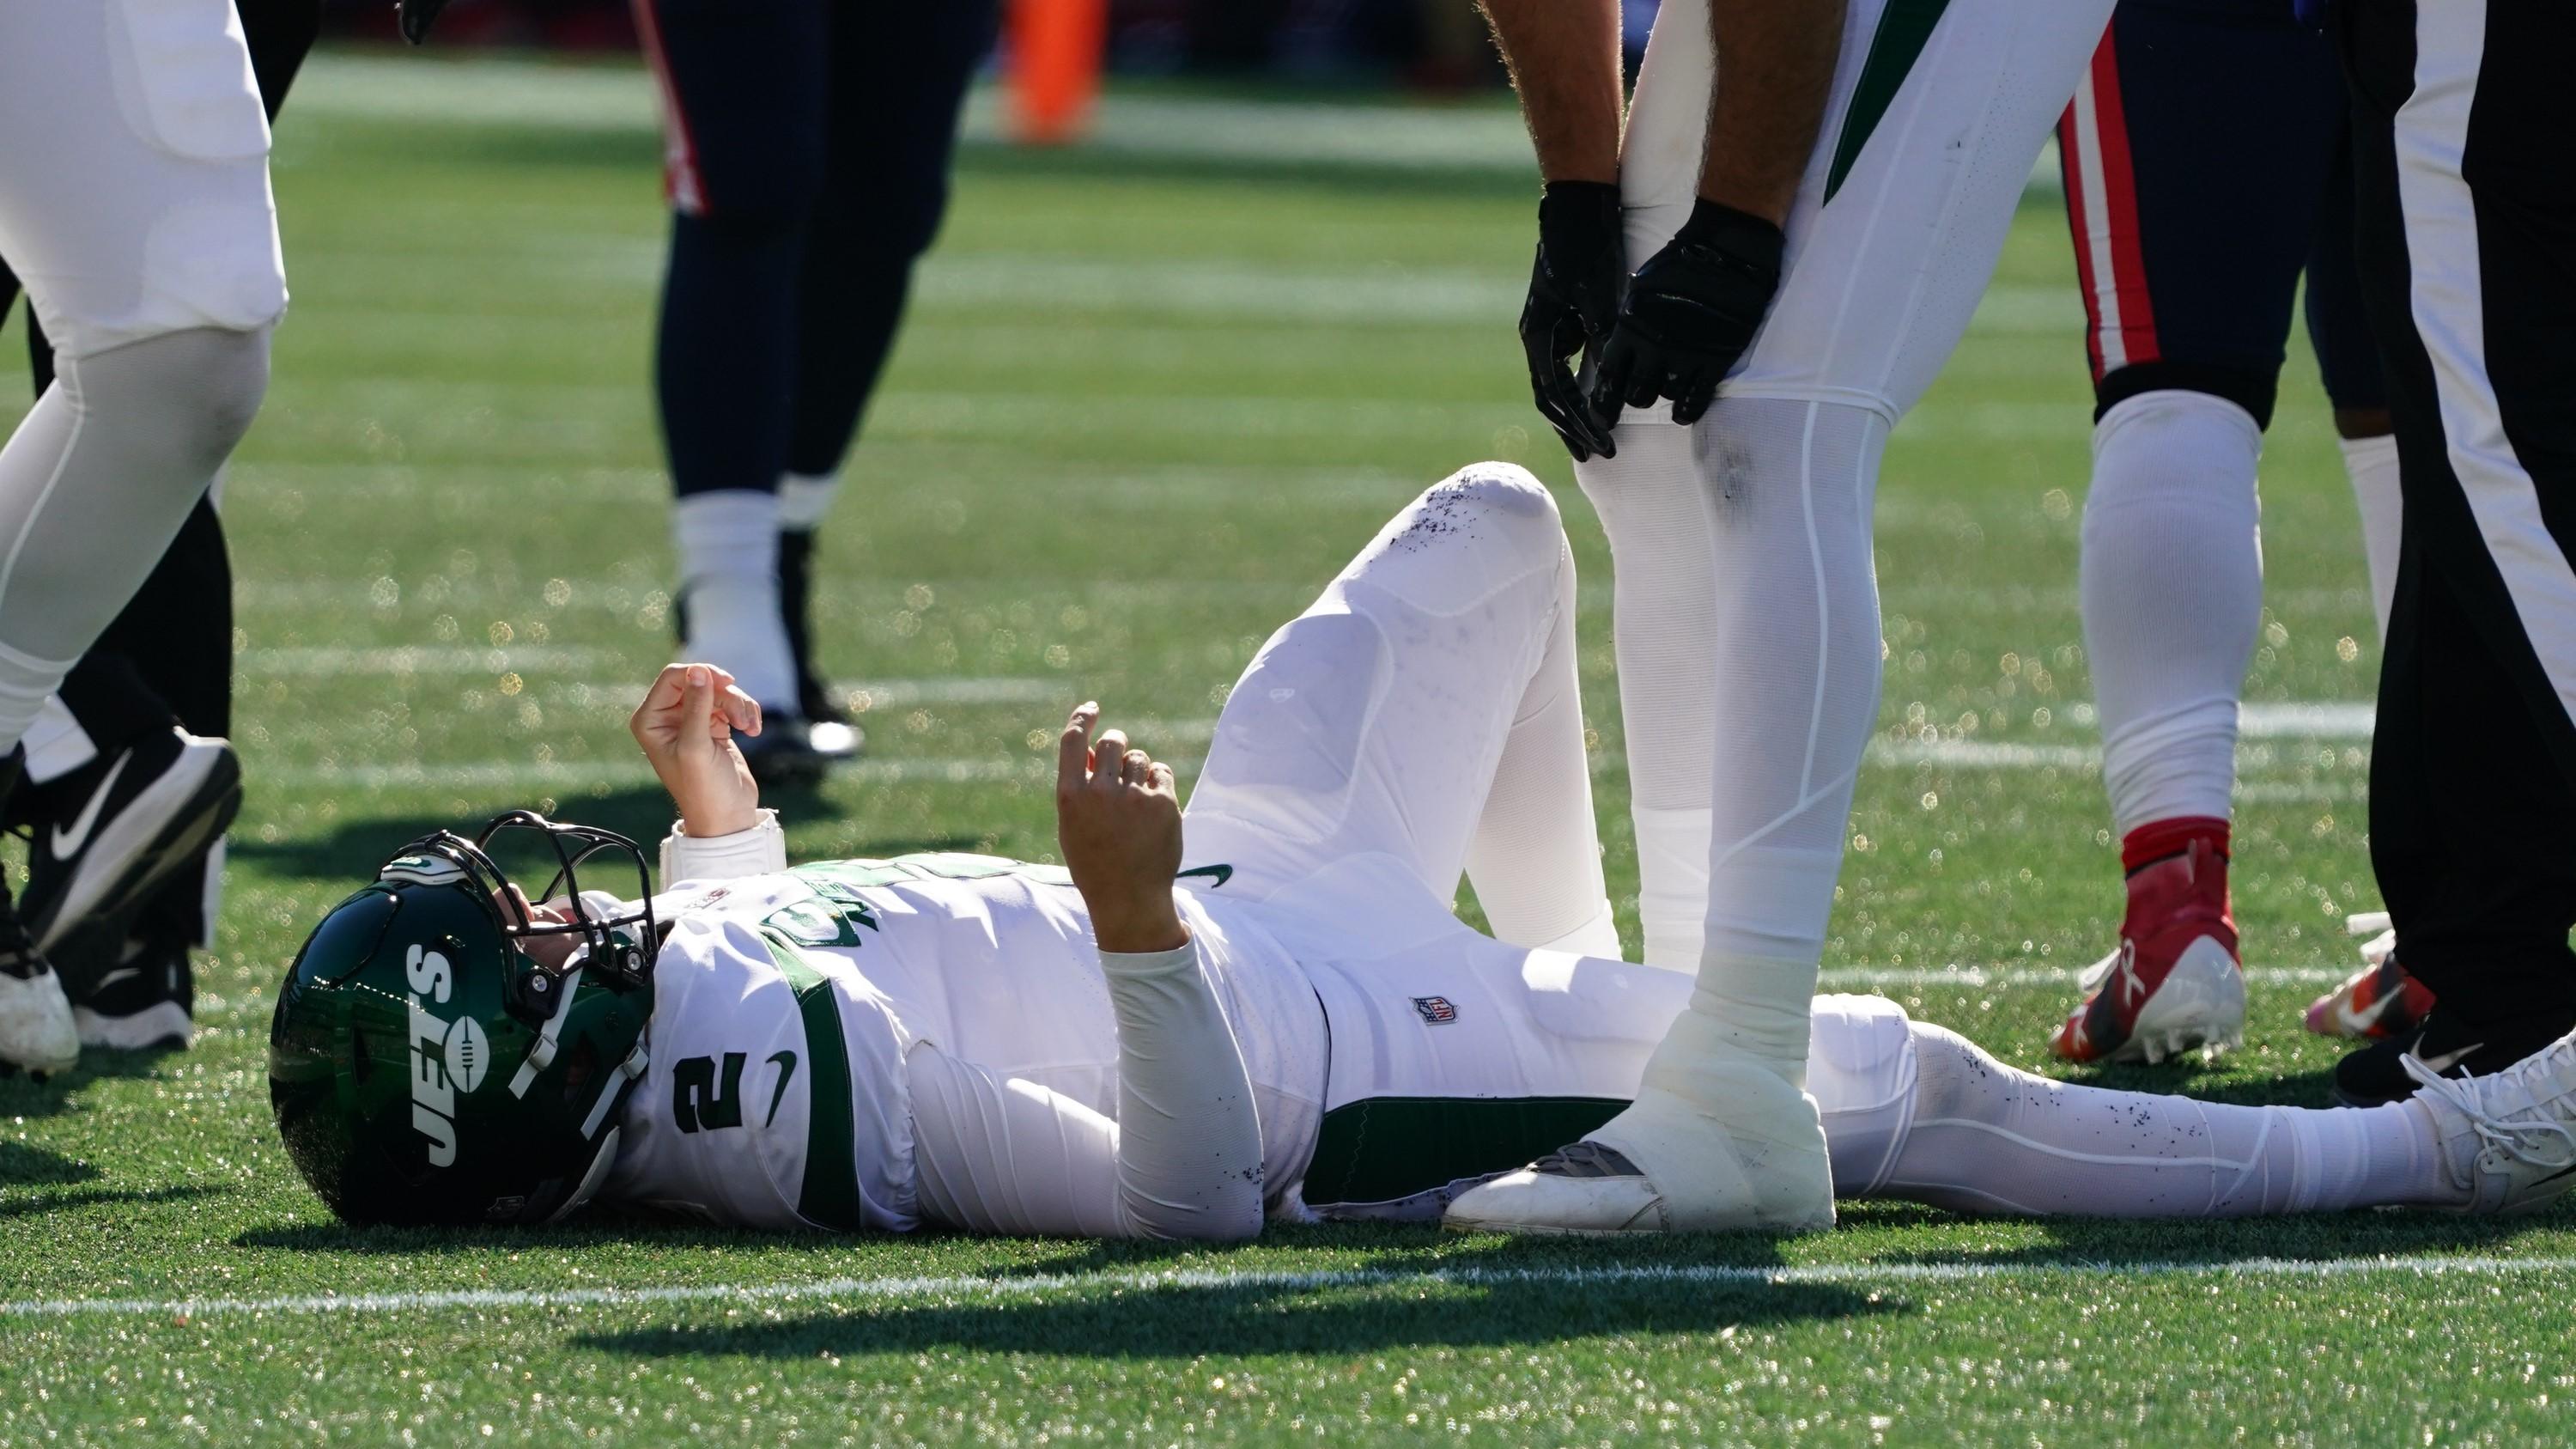 Oct 24, 2021; Foxborough, Massachusetts, USA; New York Jets quarterback Zach Wilson (2) on the ground injured against the New England Patriots in the second quarter at Gillette Stadium. Mandatory Credit: David Butler II-USA TODAY Sports / David Butler II-USA TODAY Sports